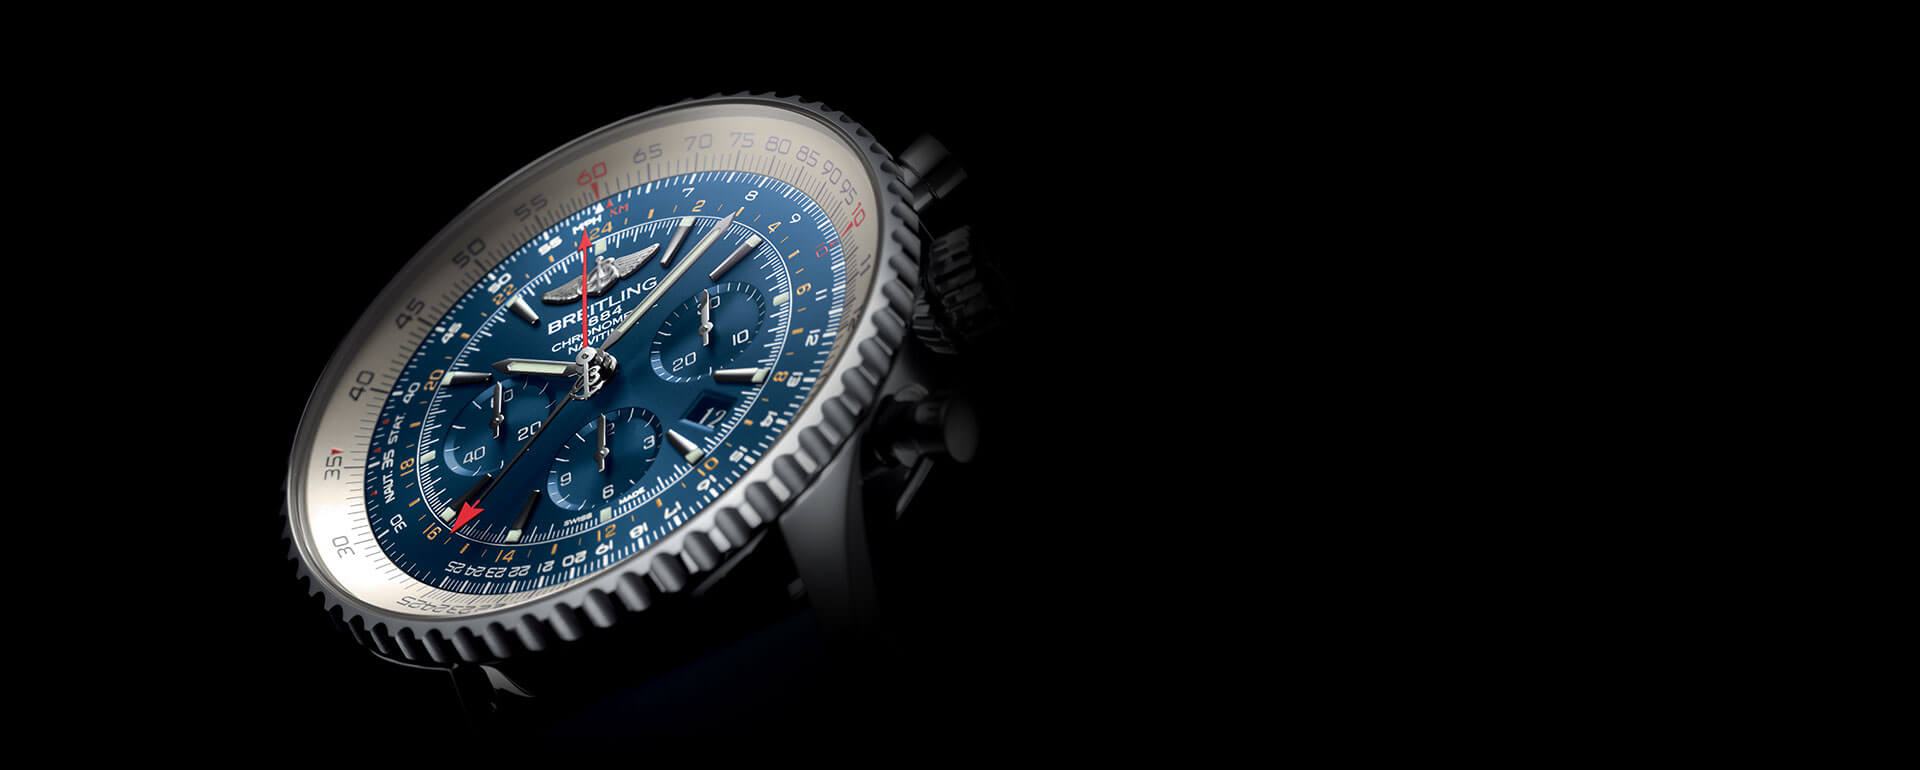 breitling Top Time x Deus (Limited Edition)